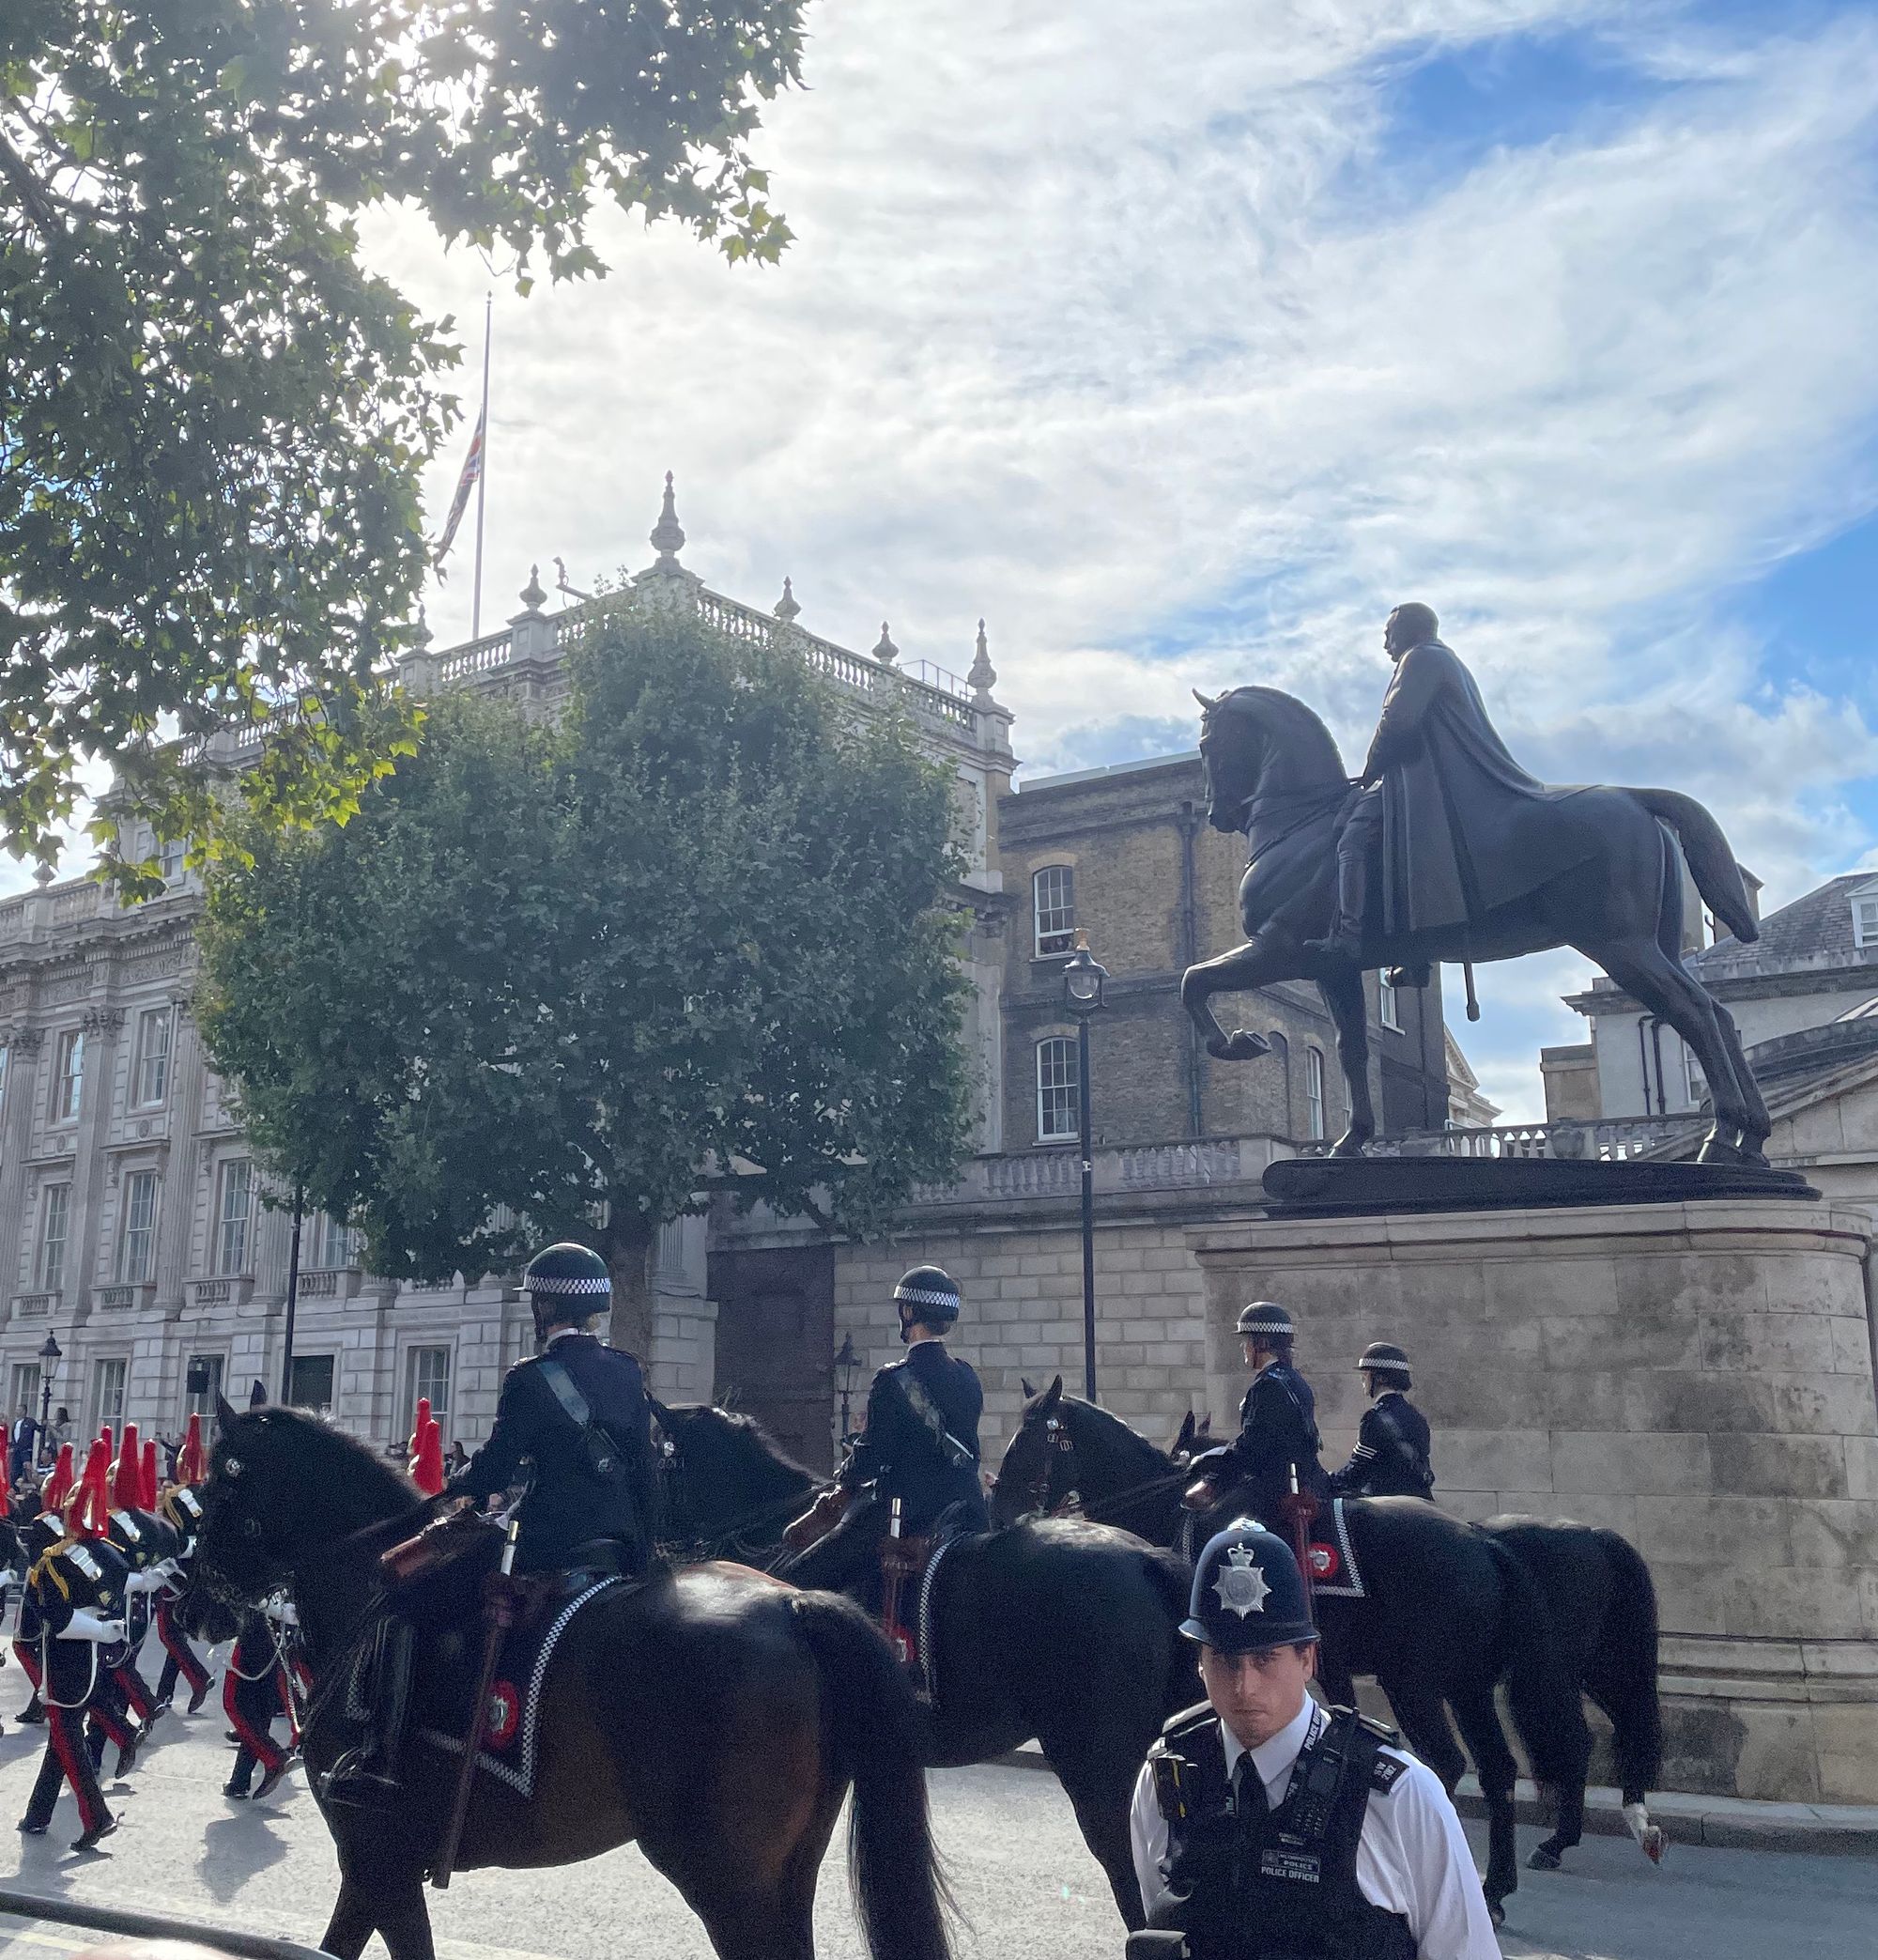 Police officers and police horses on Whitehall for the Queen's funeral.